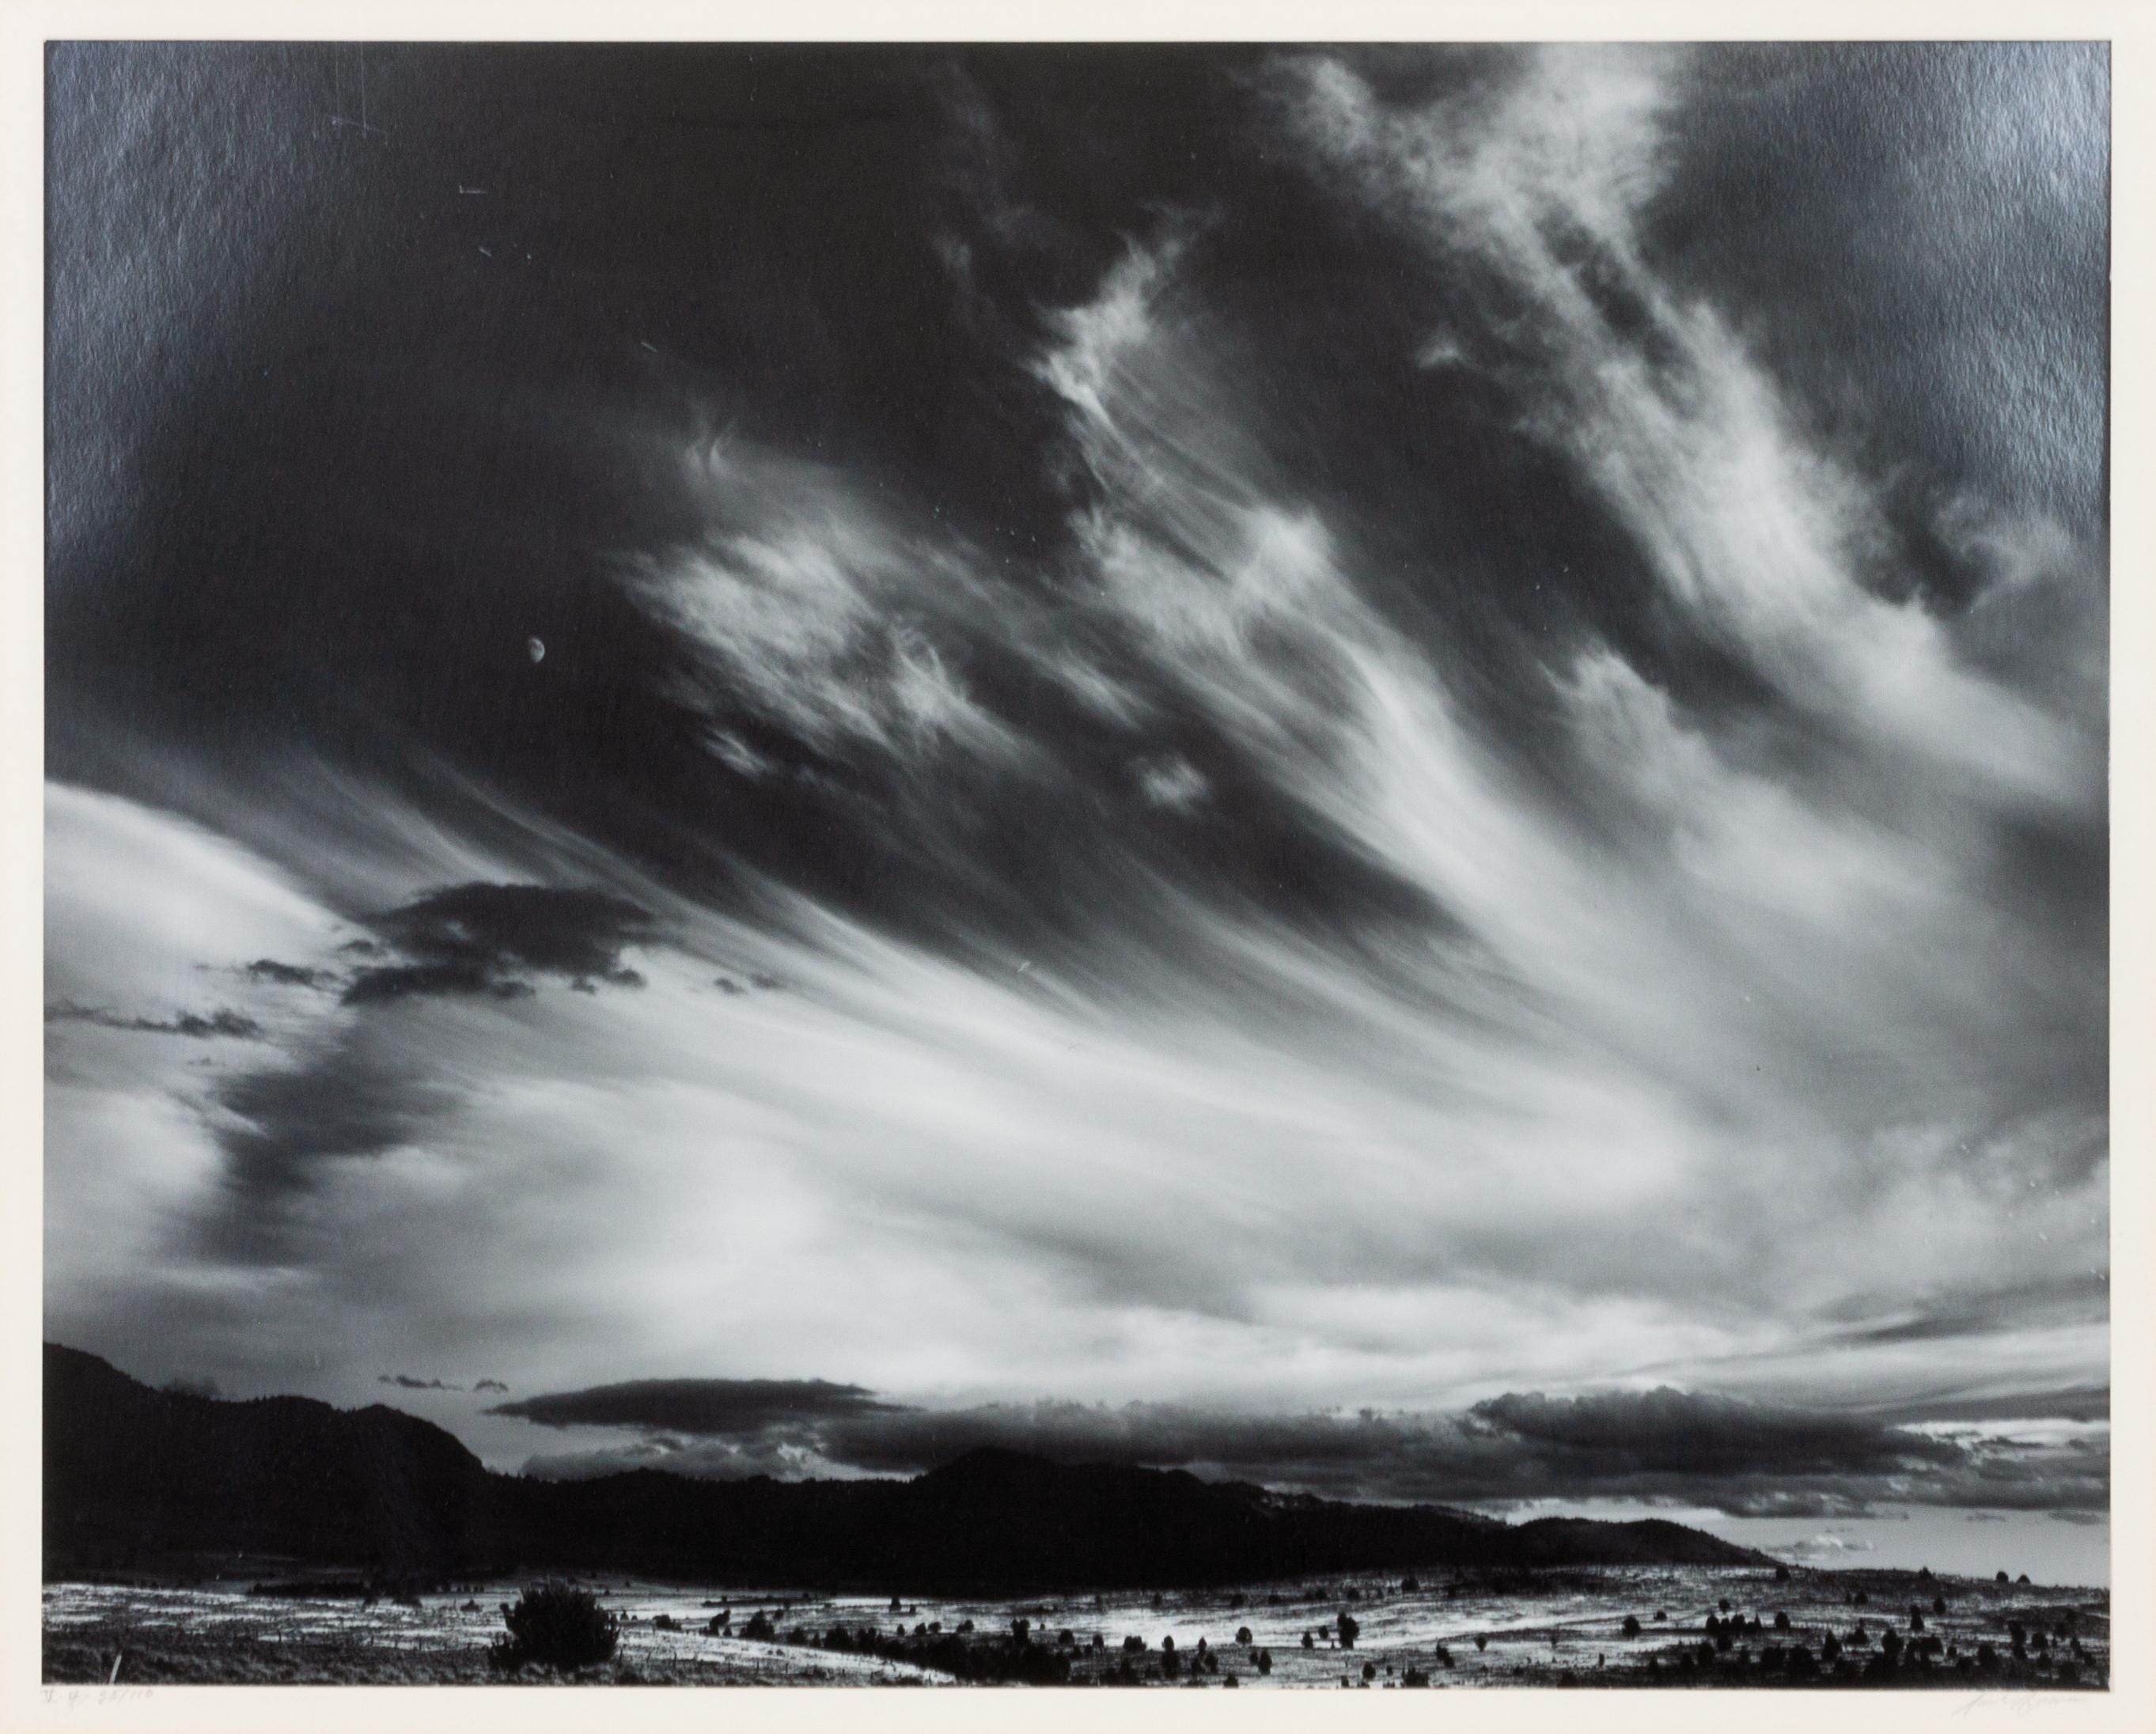 Moon and Clouds, Northern California 1959